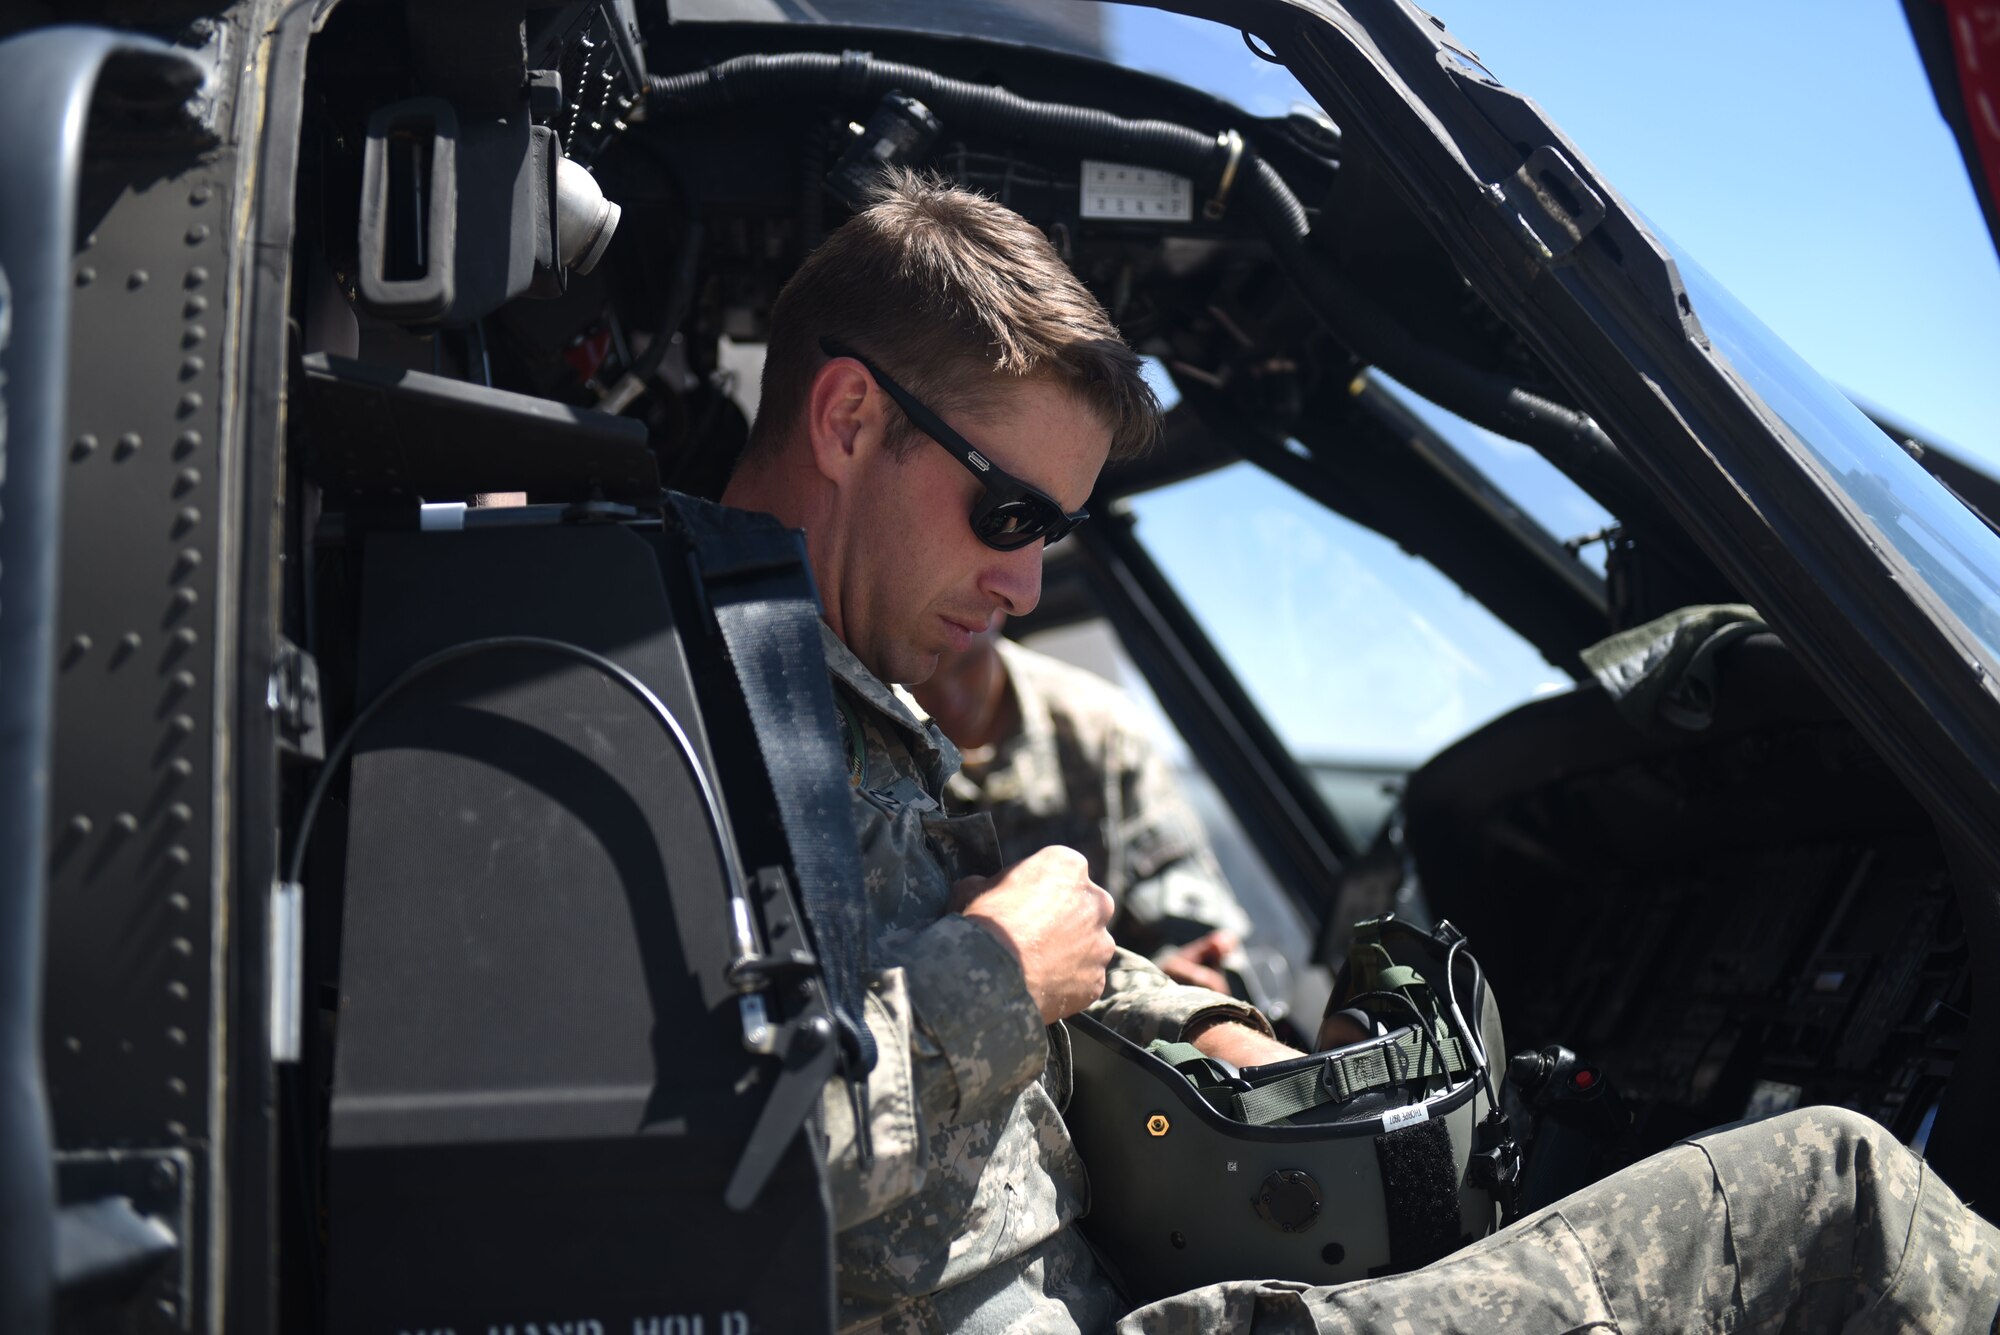 U.S. Army CWC Tim Thrope, 96th Aviation Troop Command co-pilot assigned to JBLM, stows his aviation helmet at Fairchild Air Force Base, Washington, Aug. 1, 2018. Two Washington National Guard Blackhawks were staged at Fairchild to fight the wildfire dubbed “The Sheep Creek Fire.” Washington National Guard efforts are currently focused on keeping the fire south of Sheep Creek, located north of Colville National Forest near the United States-Canadian border. Five 20-member local fire-fighting hand crews are already deployed fighting the fire, very soon to be aided by the WNG and its citizen soldiers. (U.S. Air Force photo/Airman 1st Class Whitney Laine)